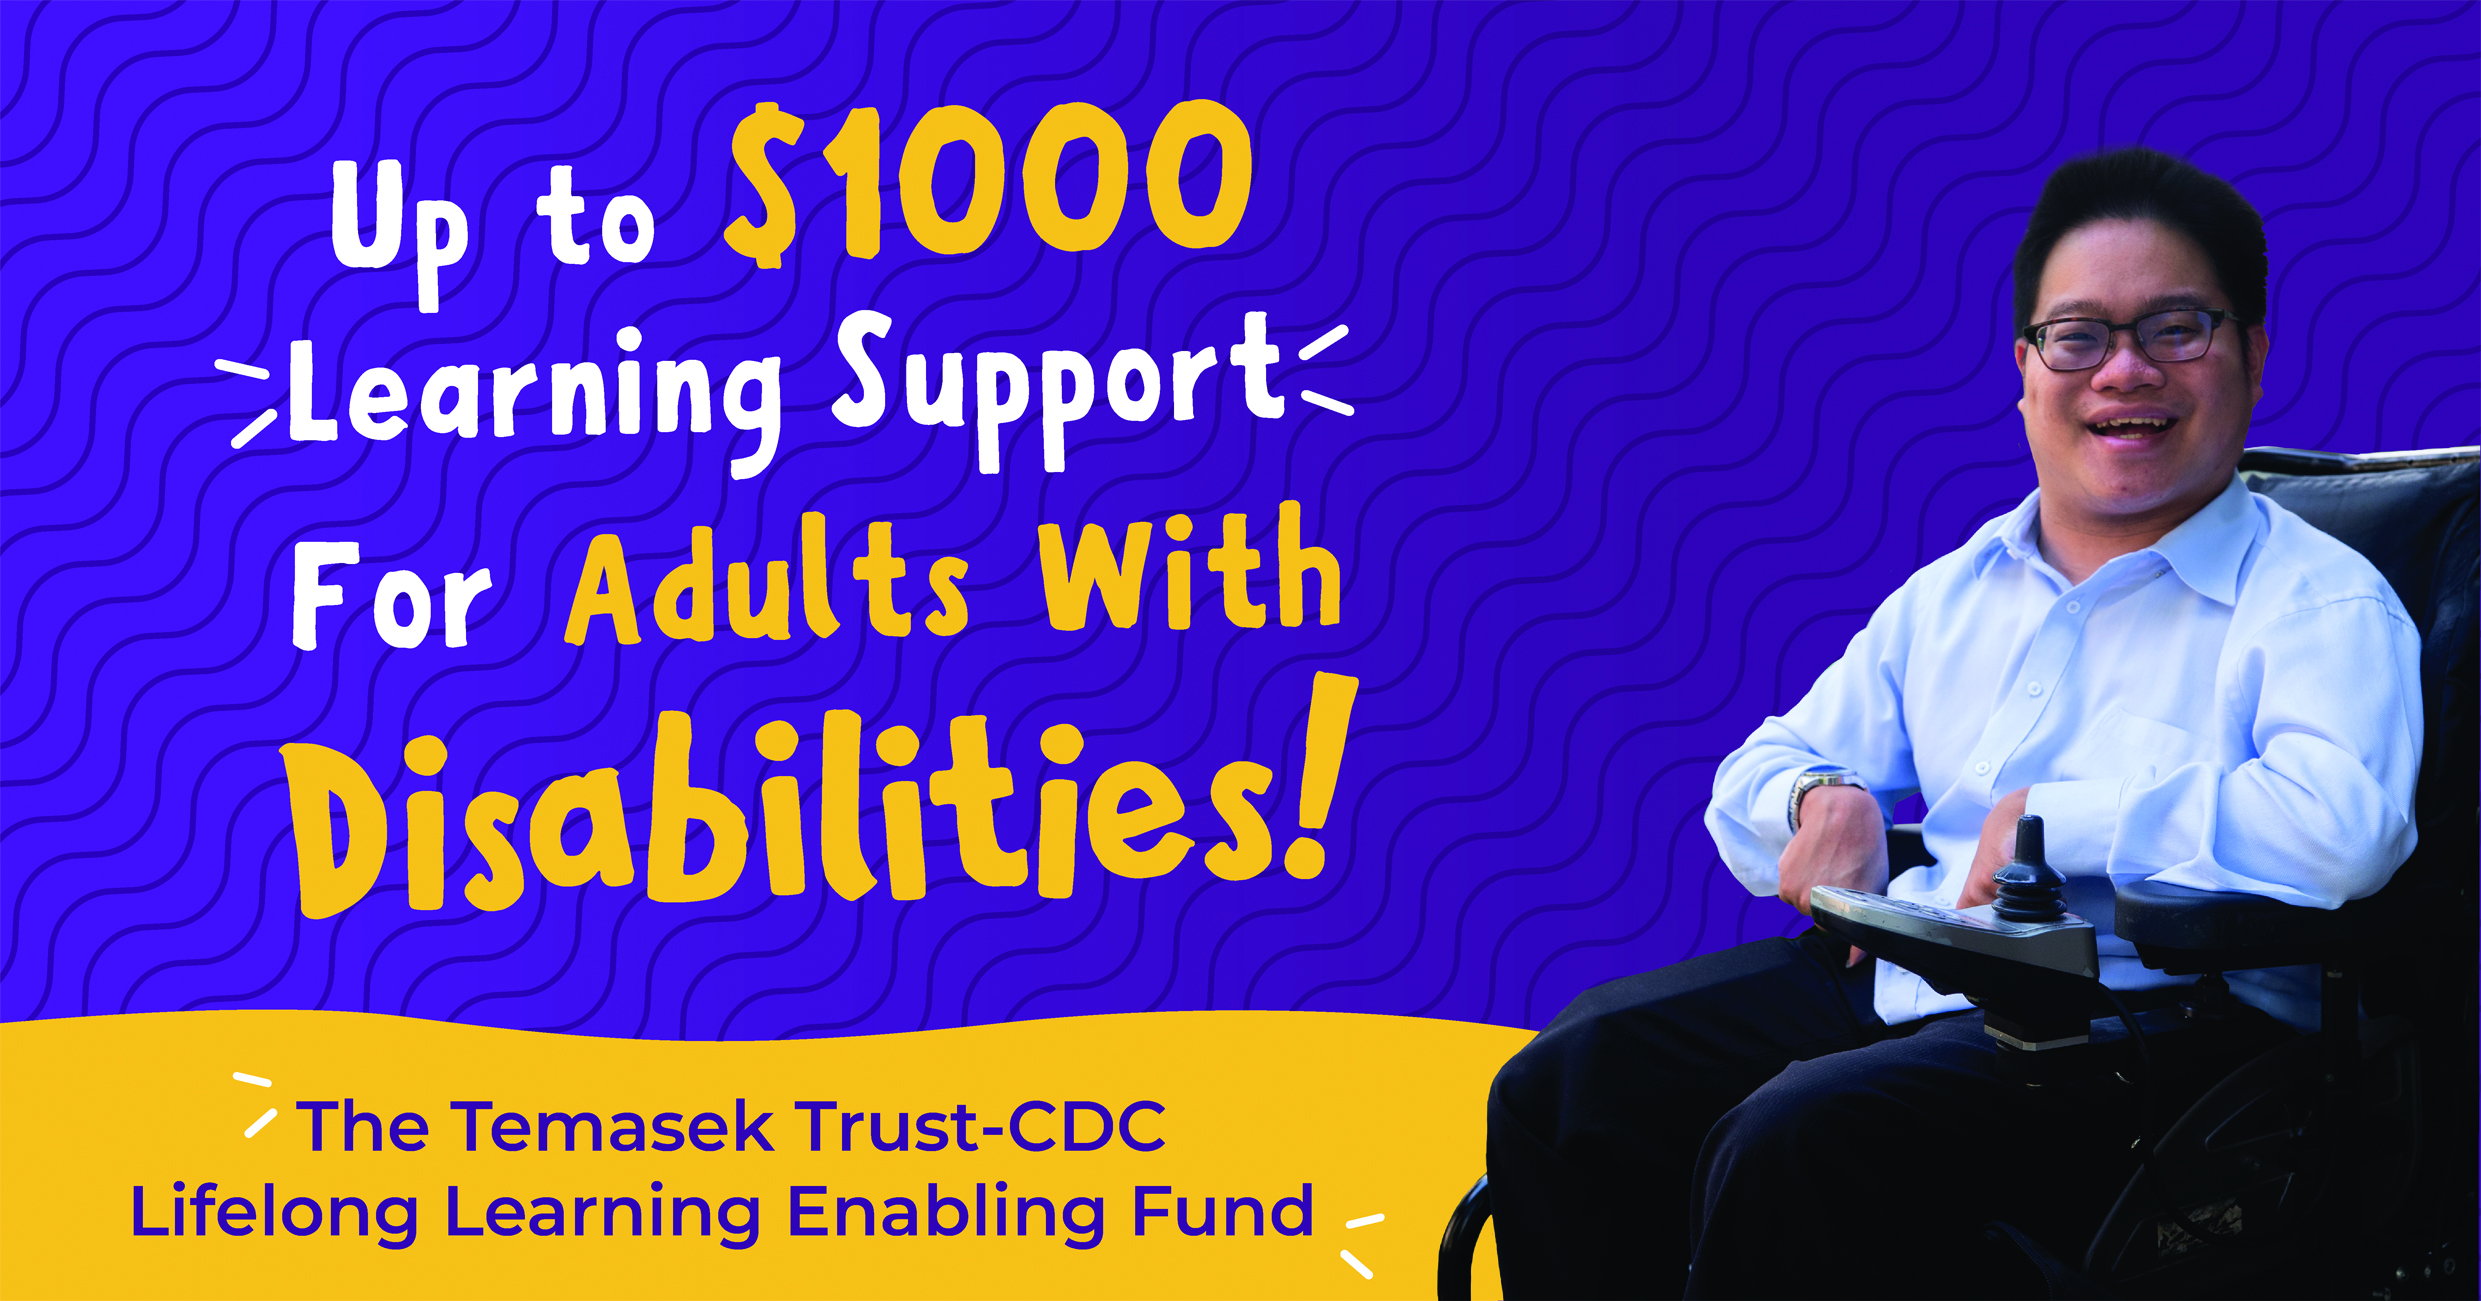 Poster of the Temasek Trust-CDC Lifelong Learning Enabling Fund